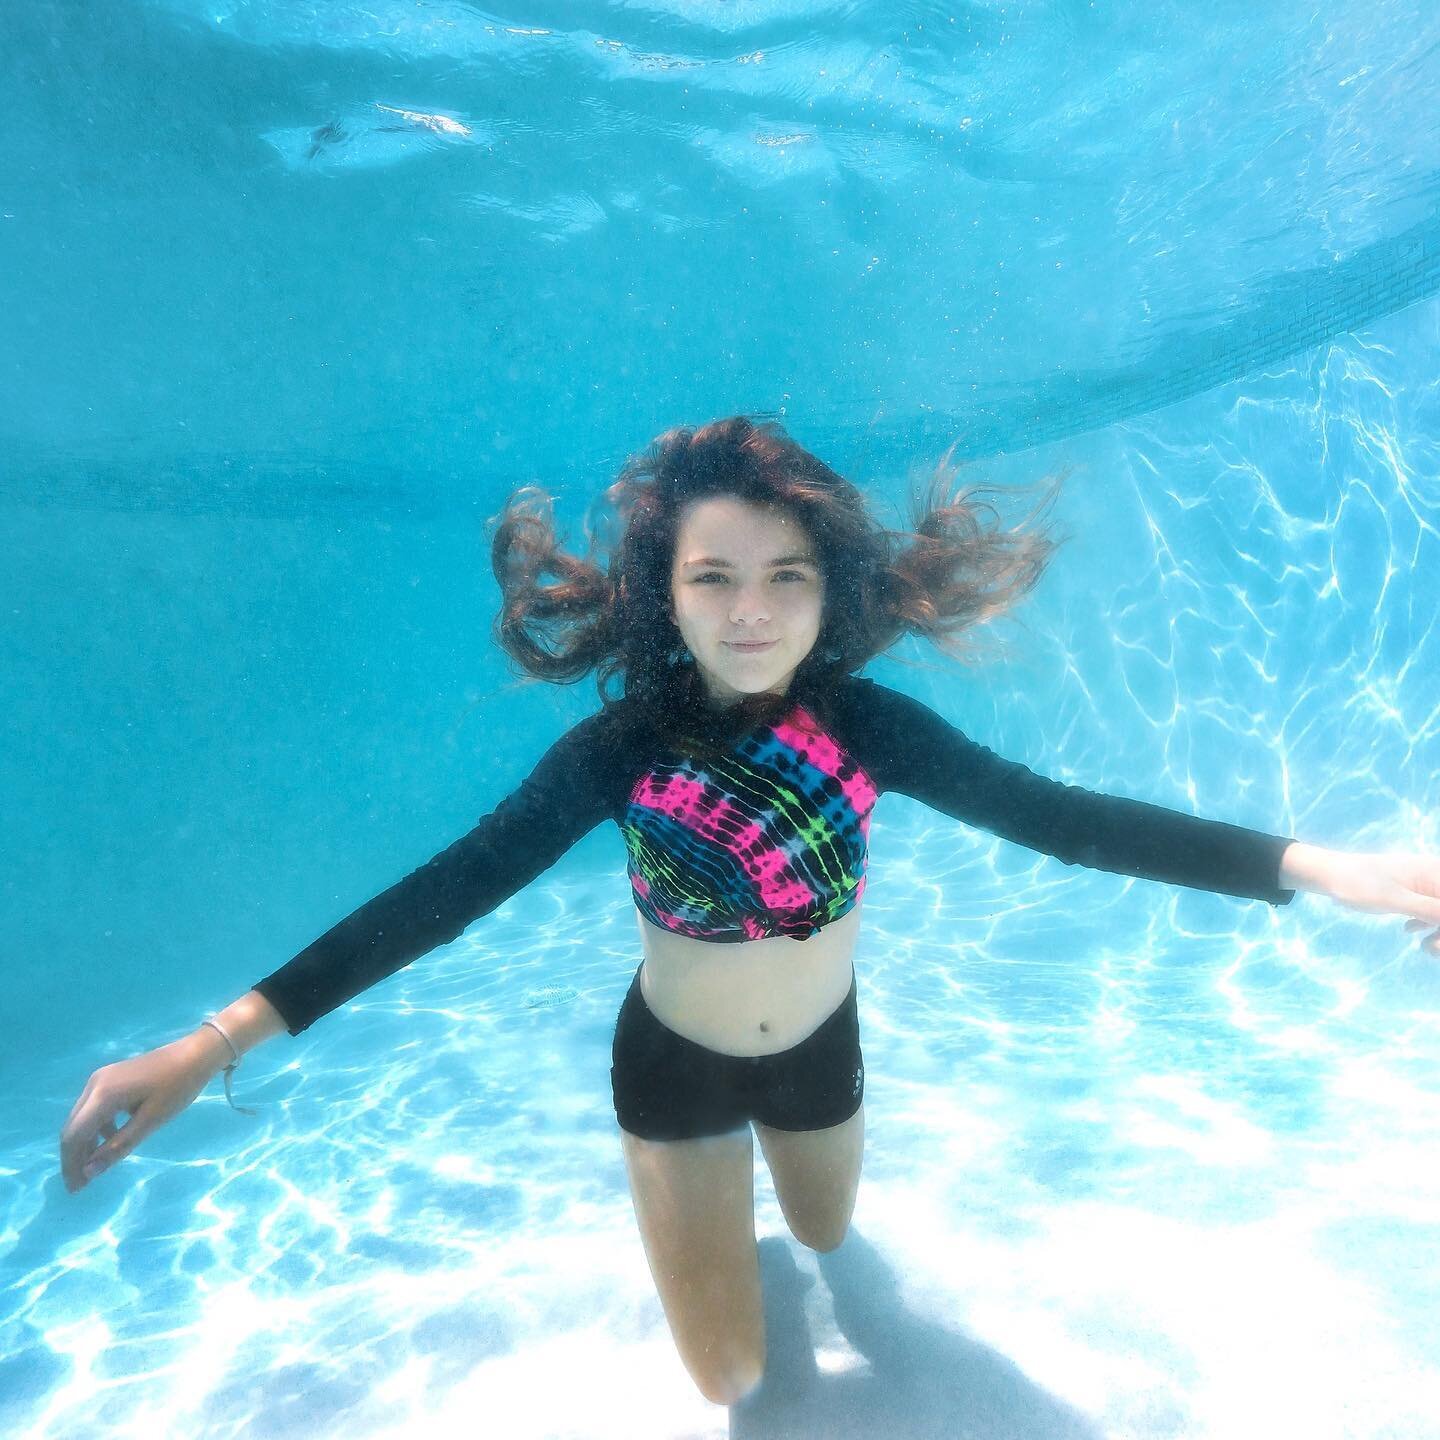 Only 6 more days to enter my Underwater Giveaway for your chance to win a free underwater session for your family! 
Here&rsquo;s how to enter:
1. Like this post
2. Tag two friends who would like an underwater session too!
3. Share this on your IG sto